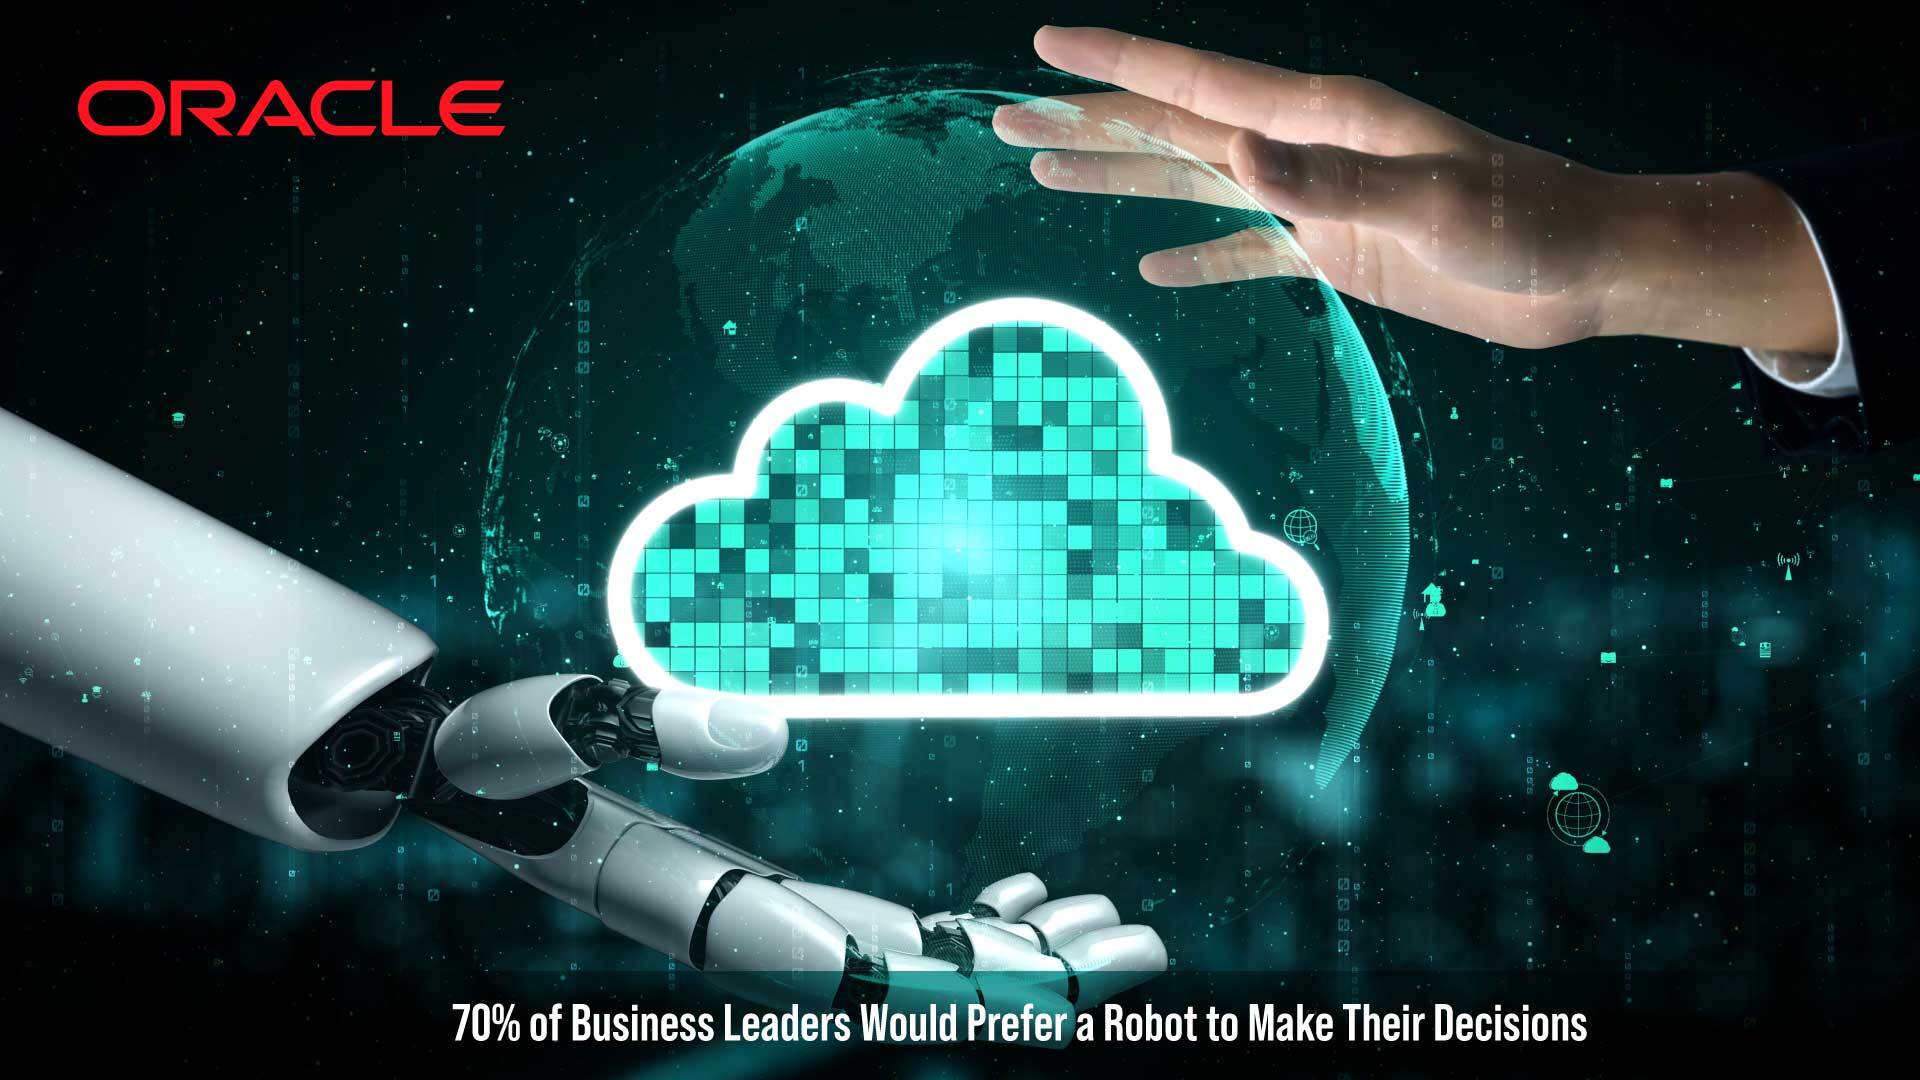 Global Study: 70% of Business Leaders Would Prefer a Robot to Make Their Decisions